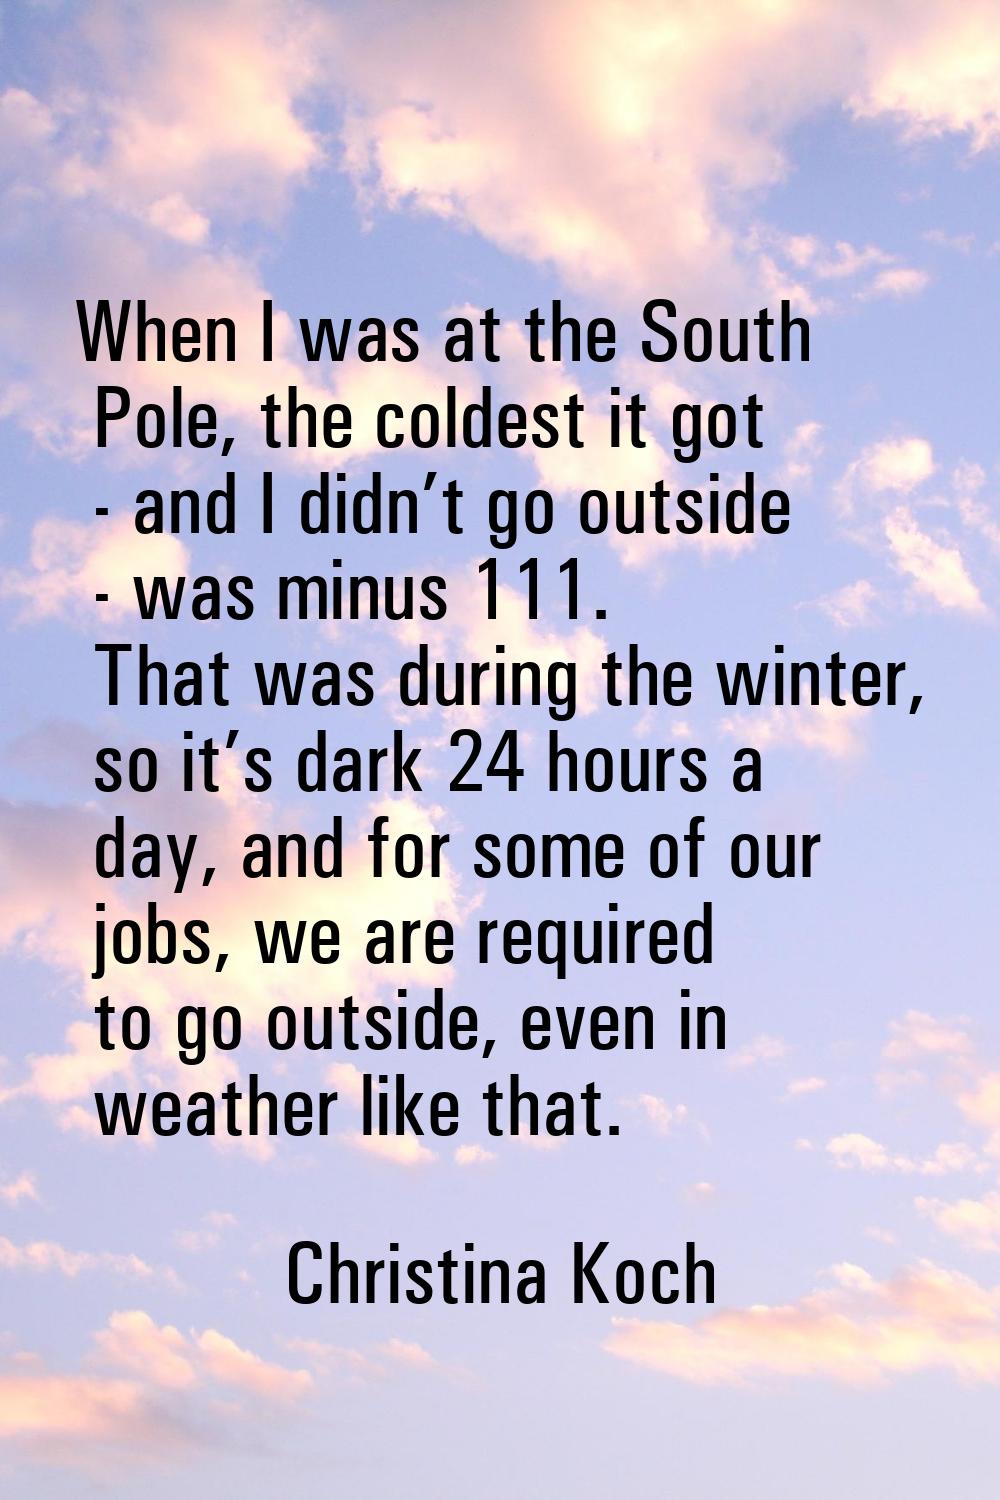 When I was at the South Pole, the coldest it got - and I didn’t go outside - was minus 111. That wa